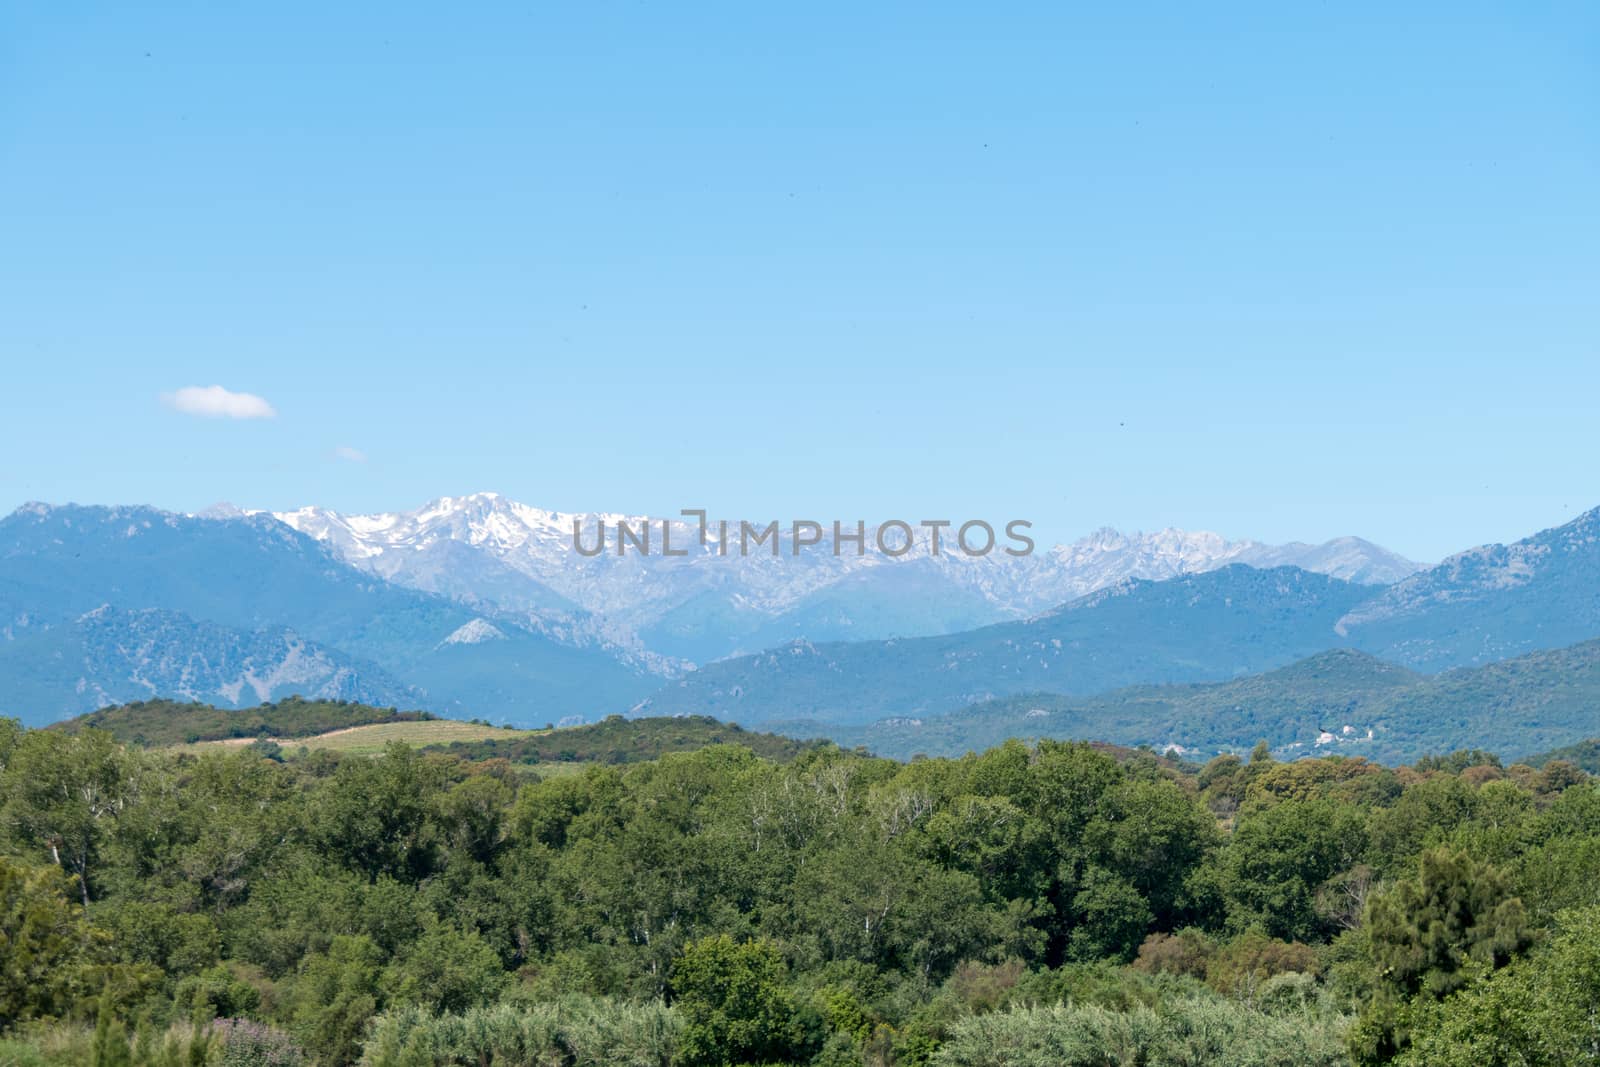 A landscape shot with green forests, mountains and a blue sky